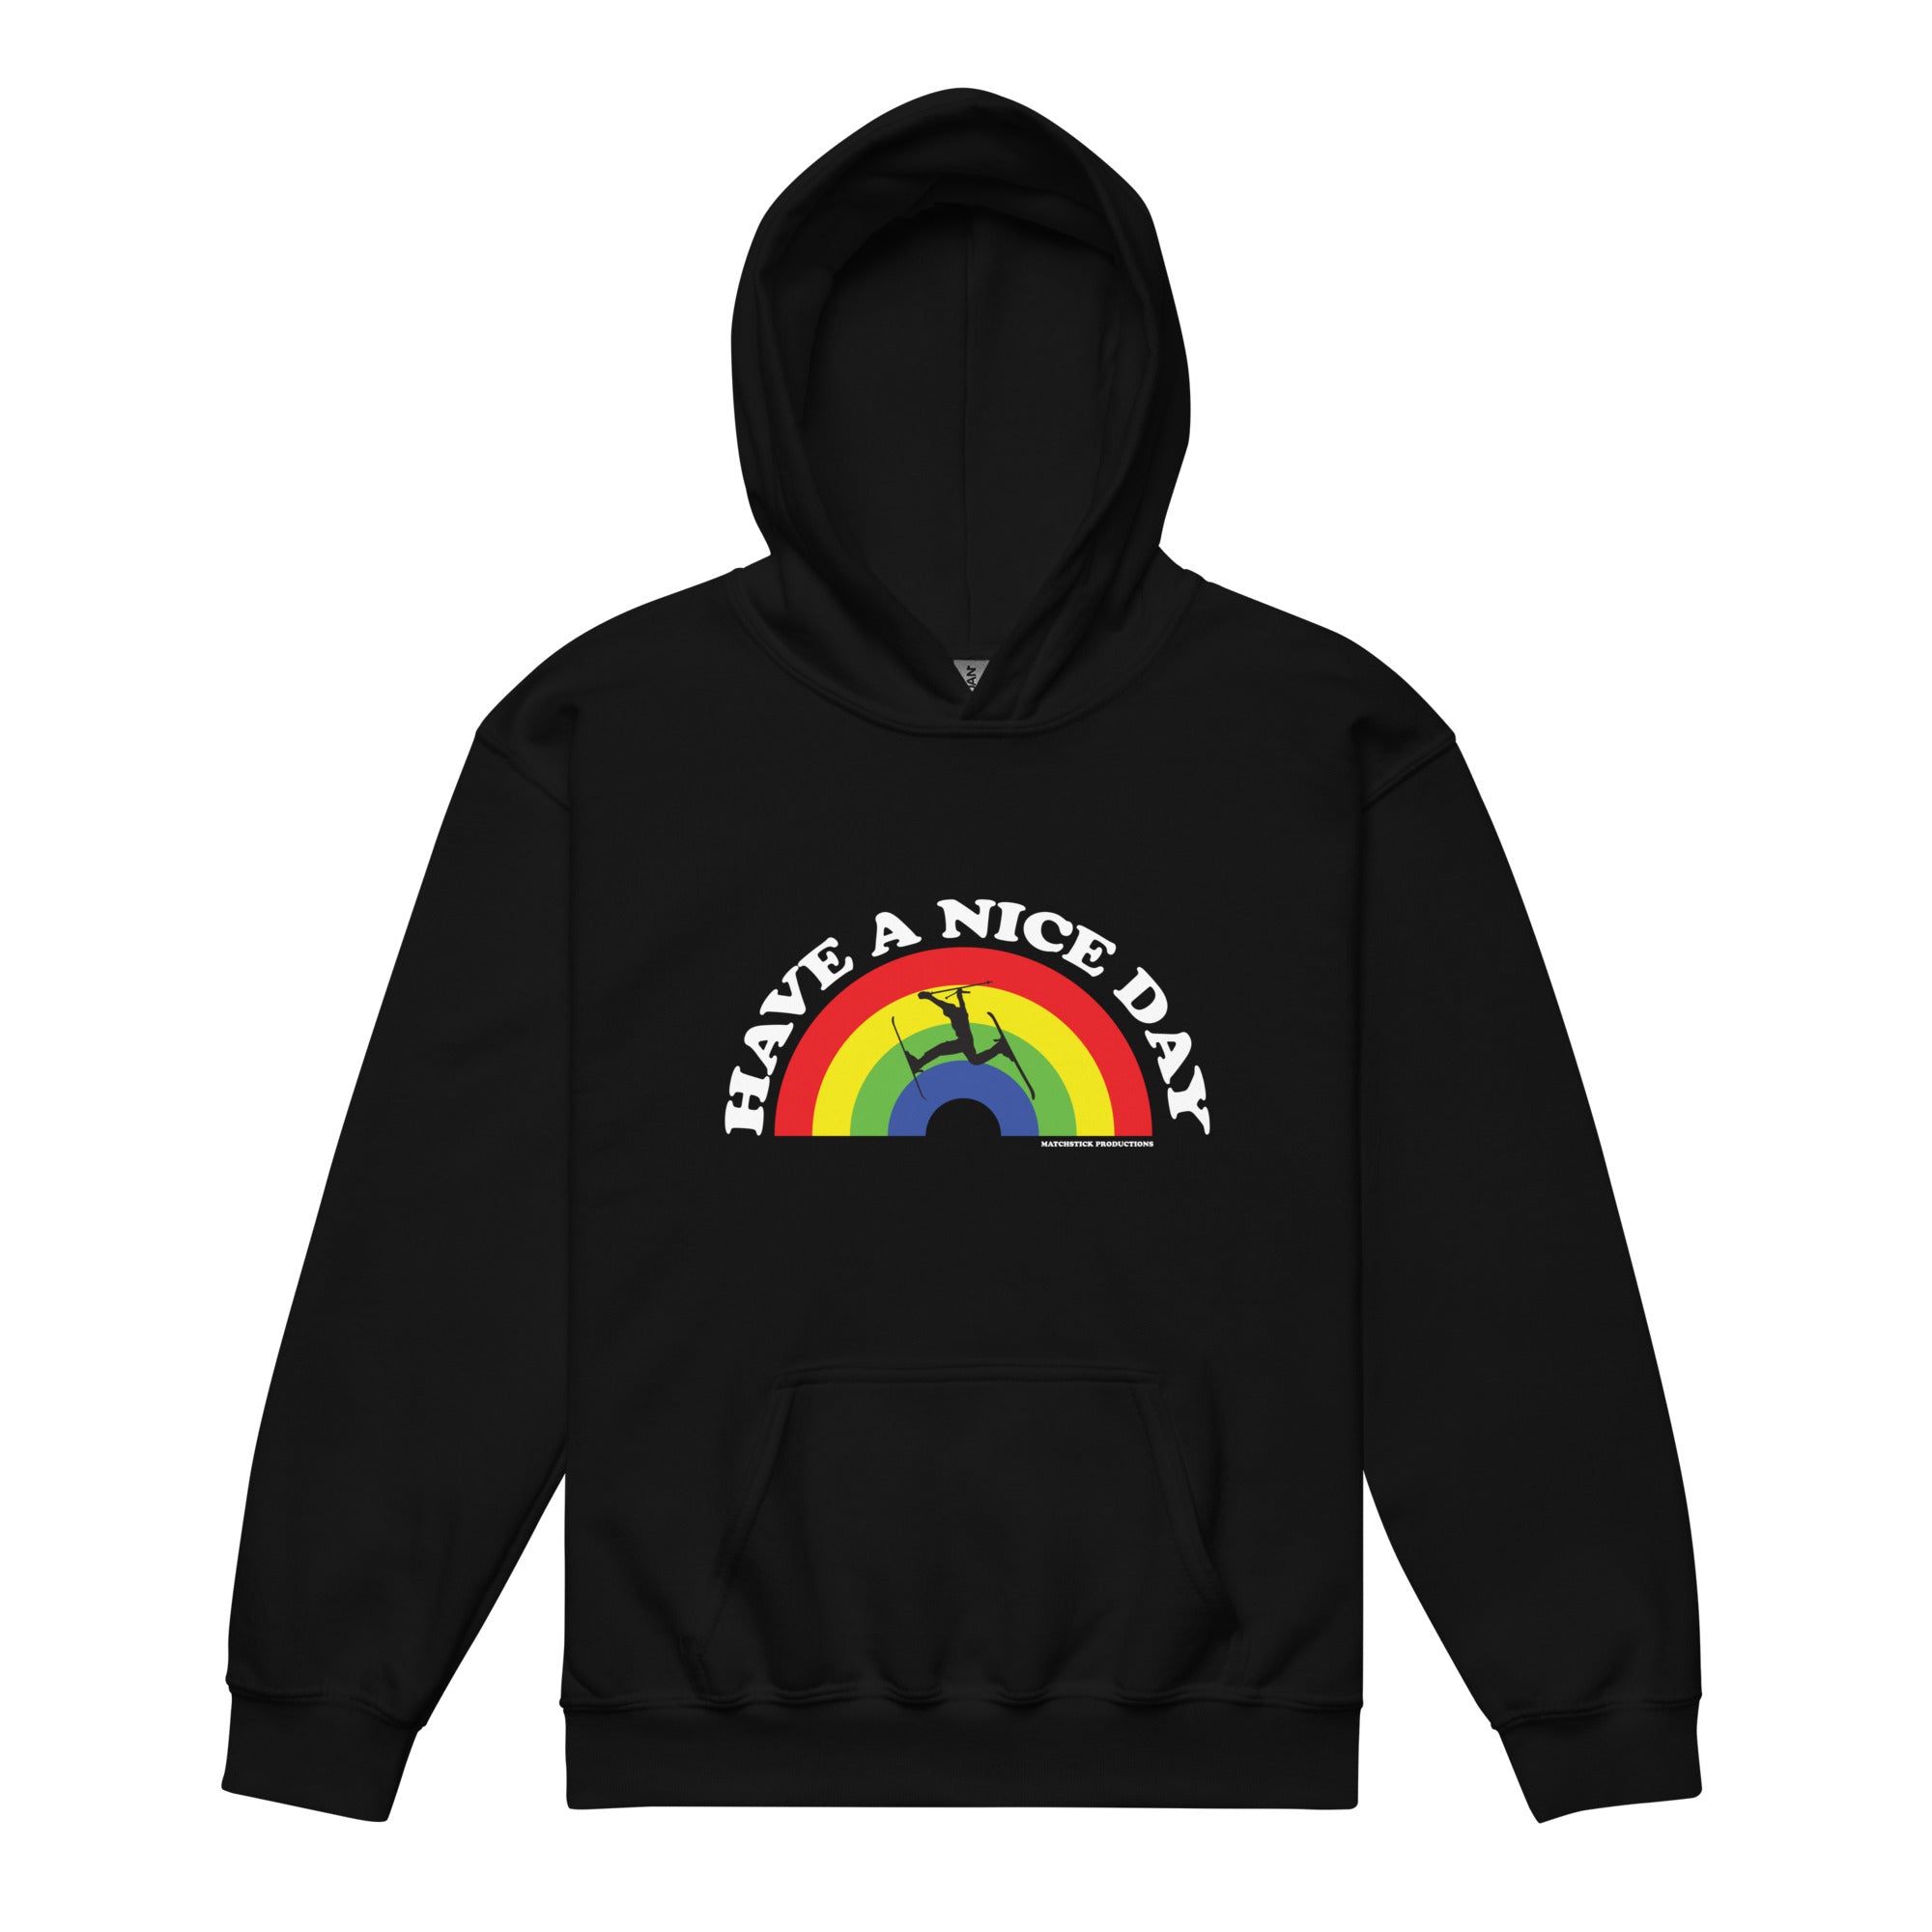 Have a Nice Day - Youth heavy blend hoodie